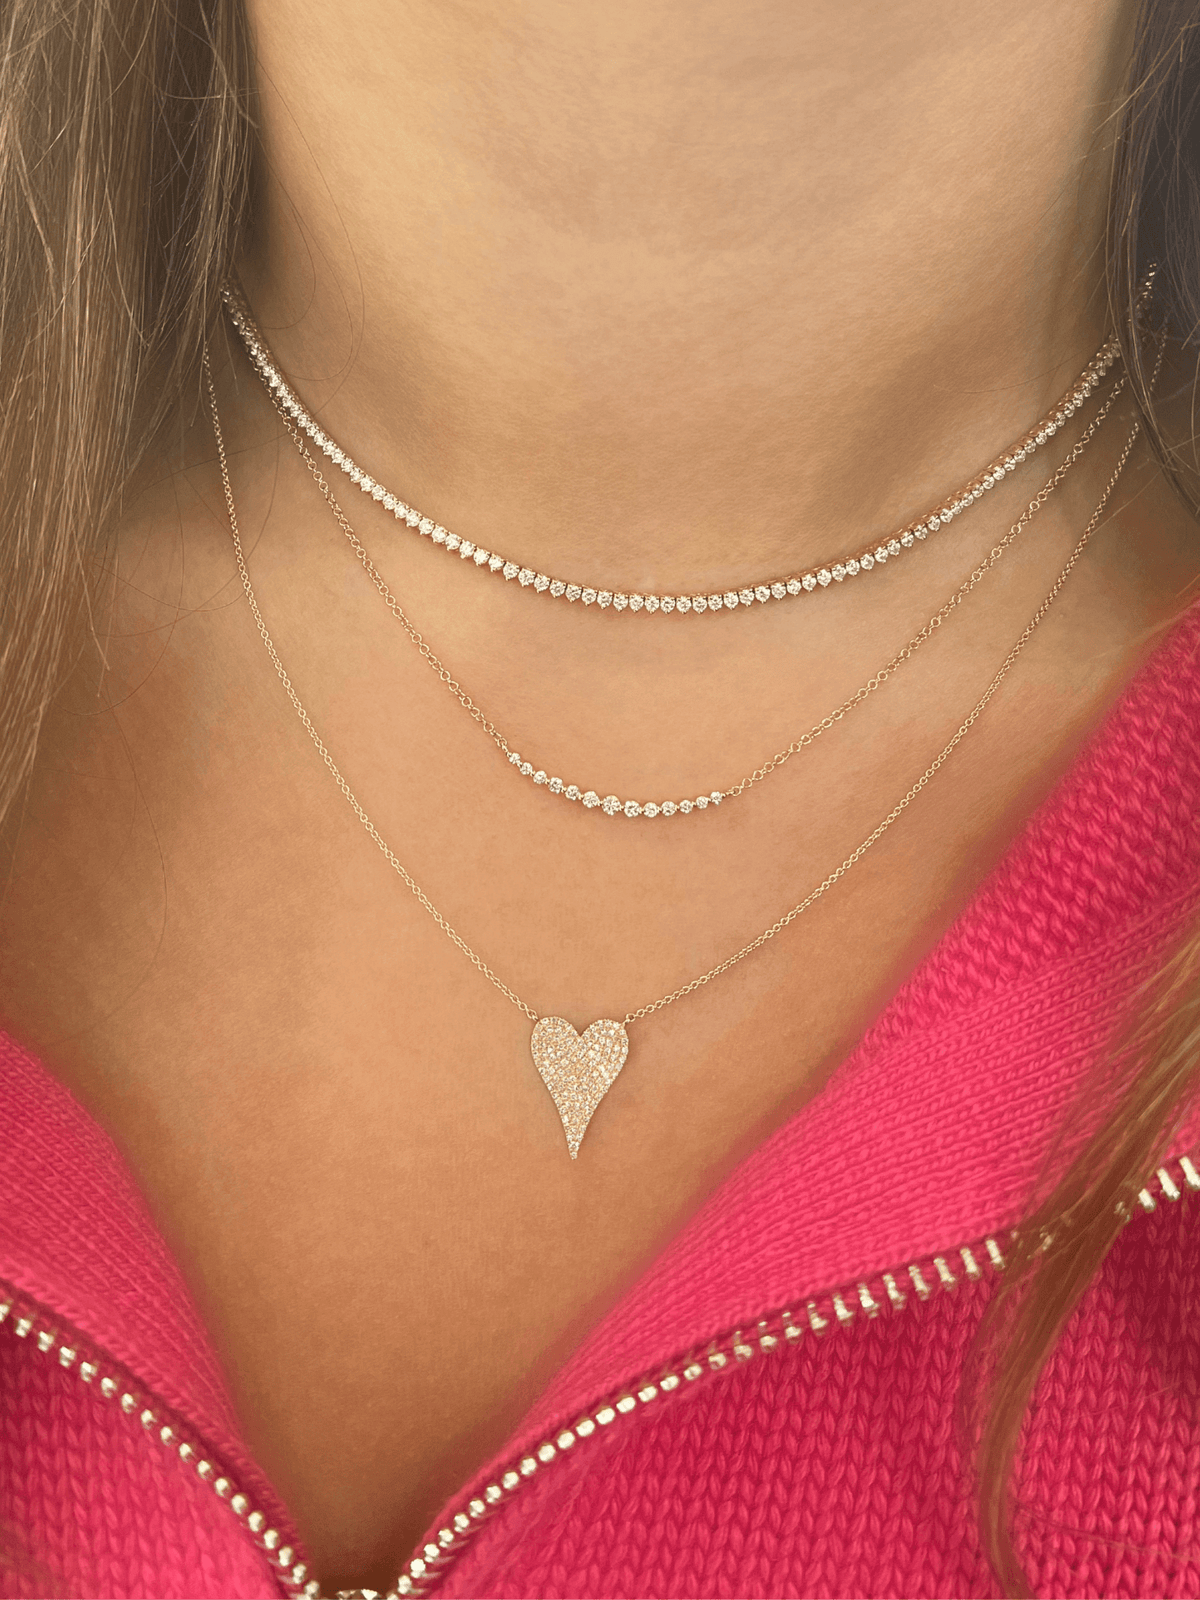 Gold diamond chain necklace layered with diamond heart necklace and diamond tennis necklace